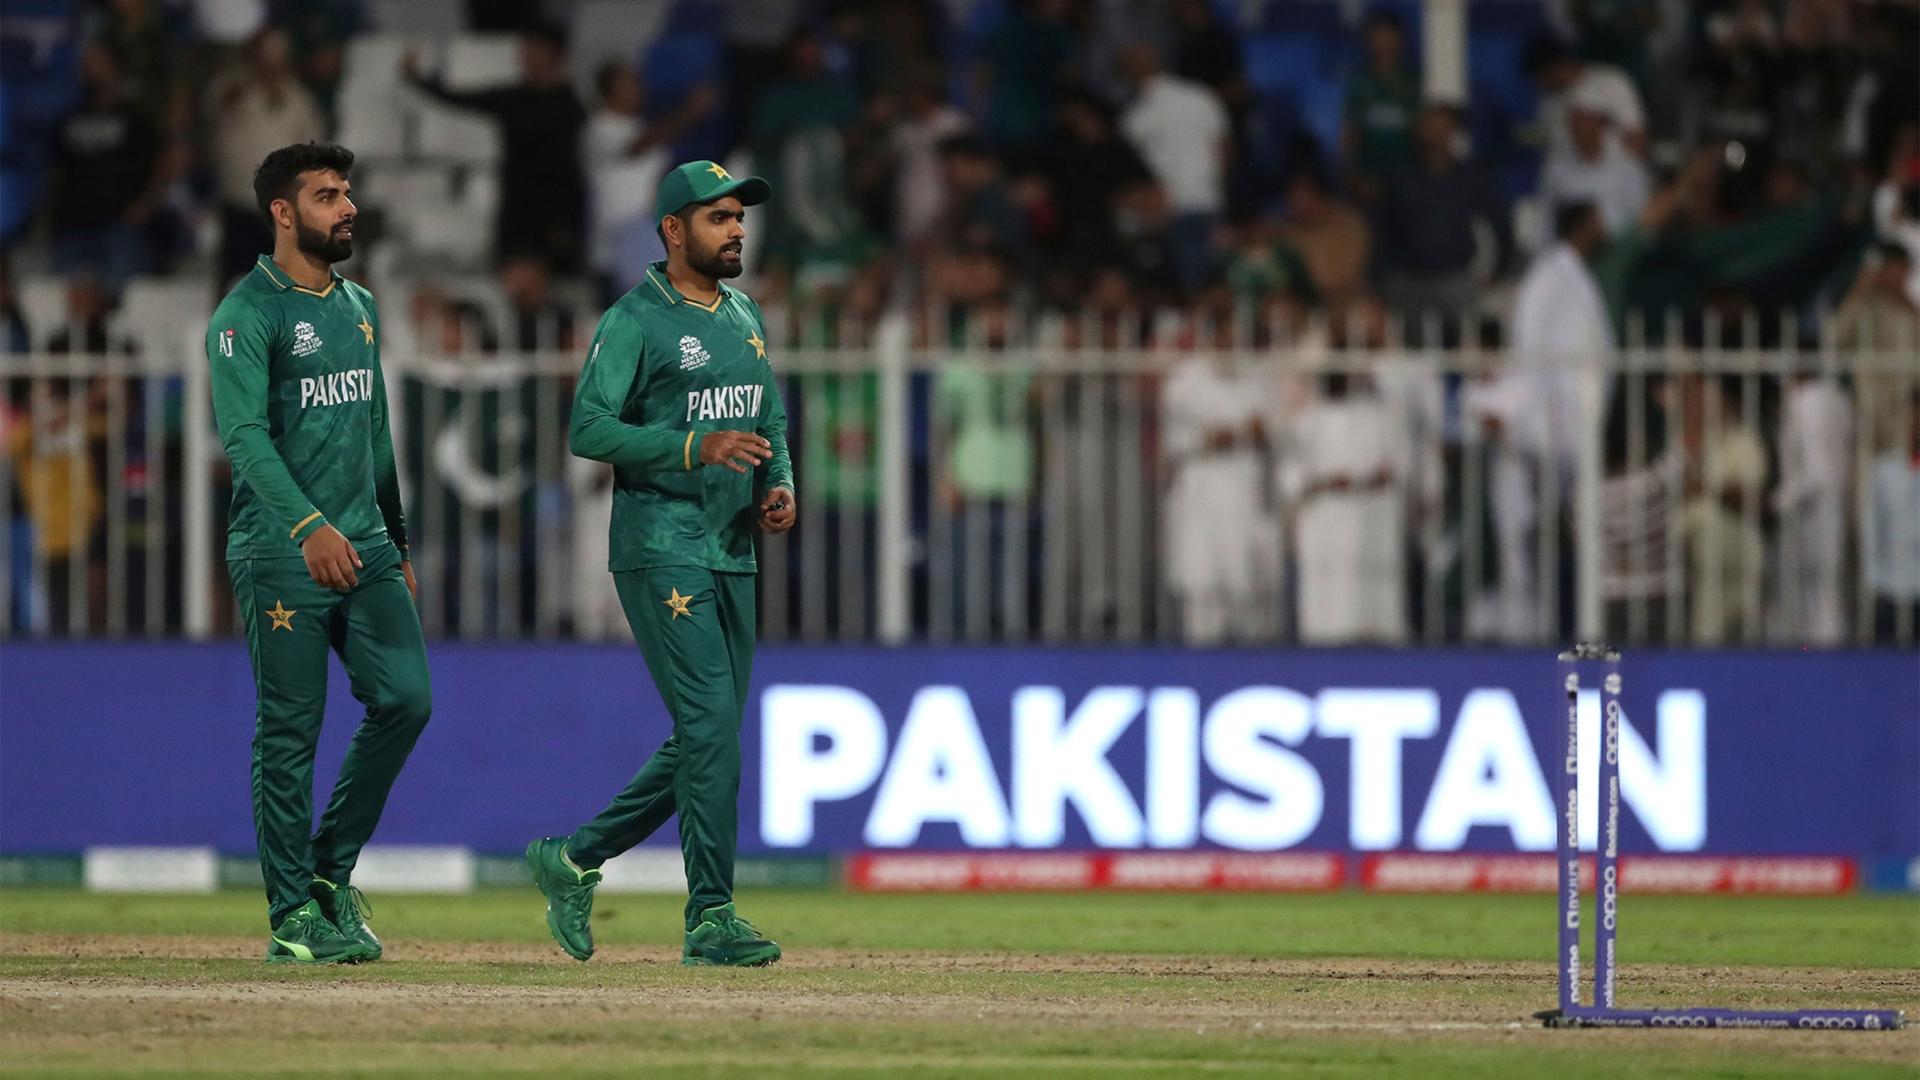 Pakistan's captain Babar Azam, right, and teammate Shadab Khan leave the field after their win in the Cricket Twenty20 World Cup match against Scotland in Sharjah, UAE